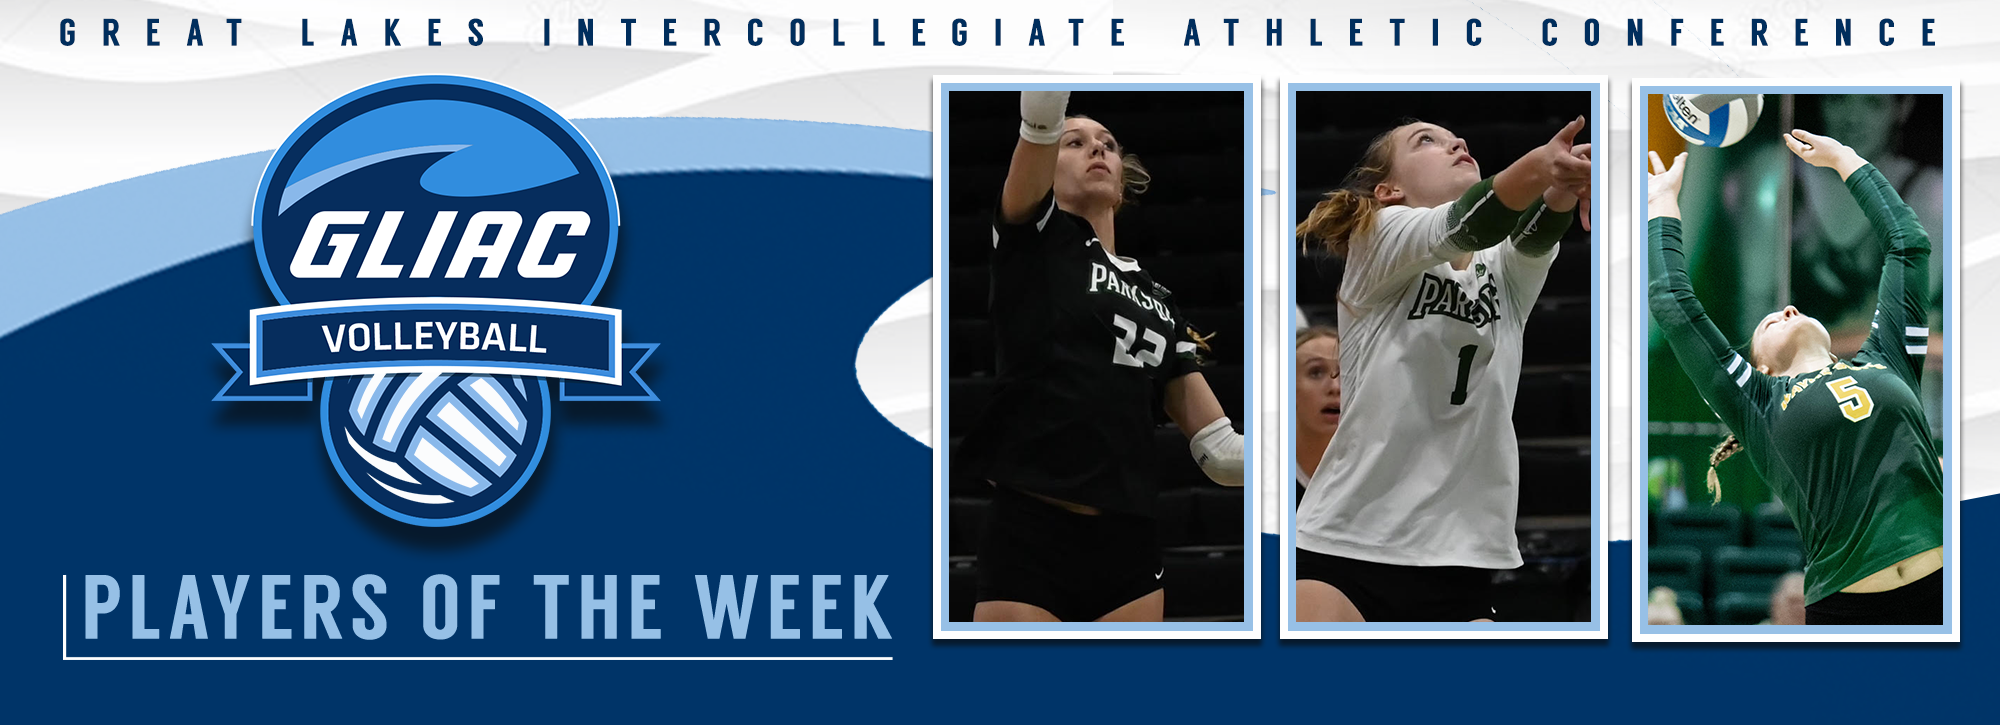 Parkside's Irvin and Harris, WSU's Dulgar earn GLIAC volleyball player of the week honors